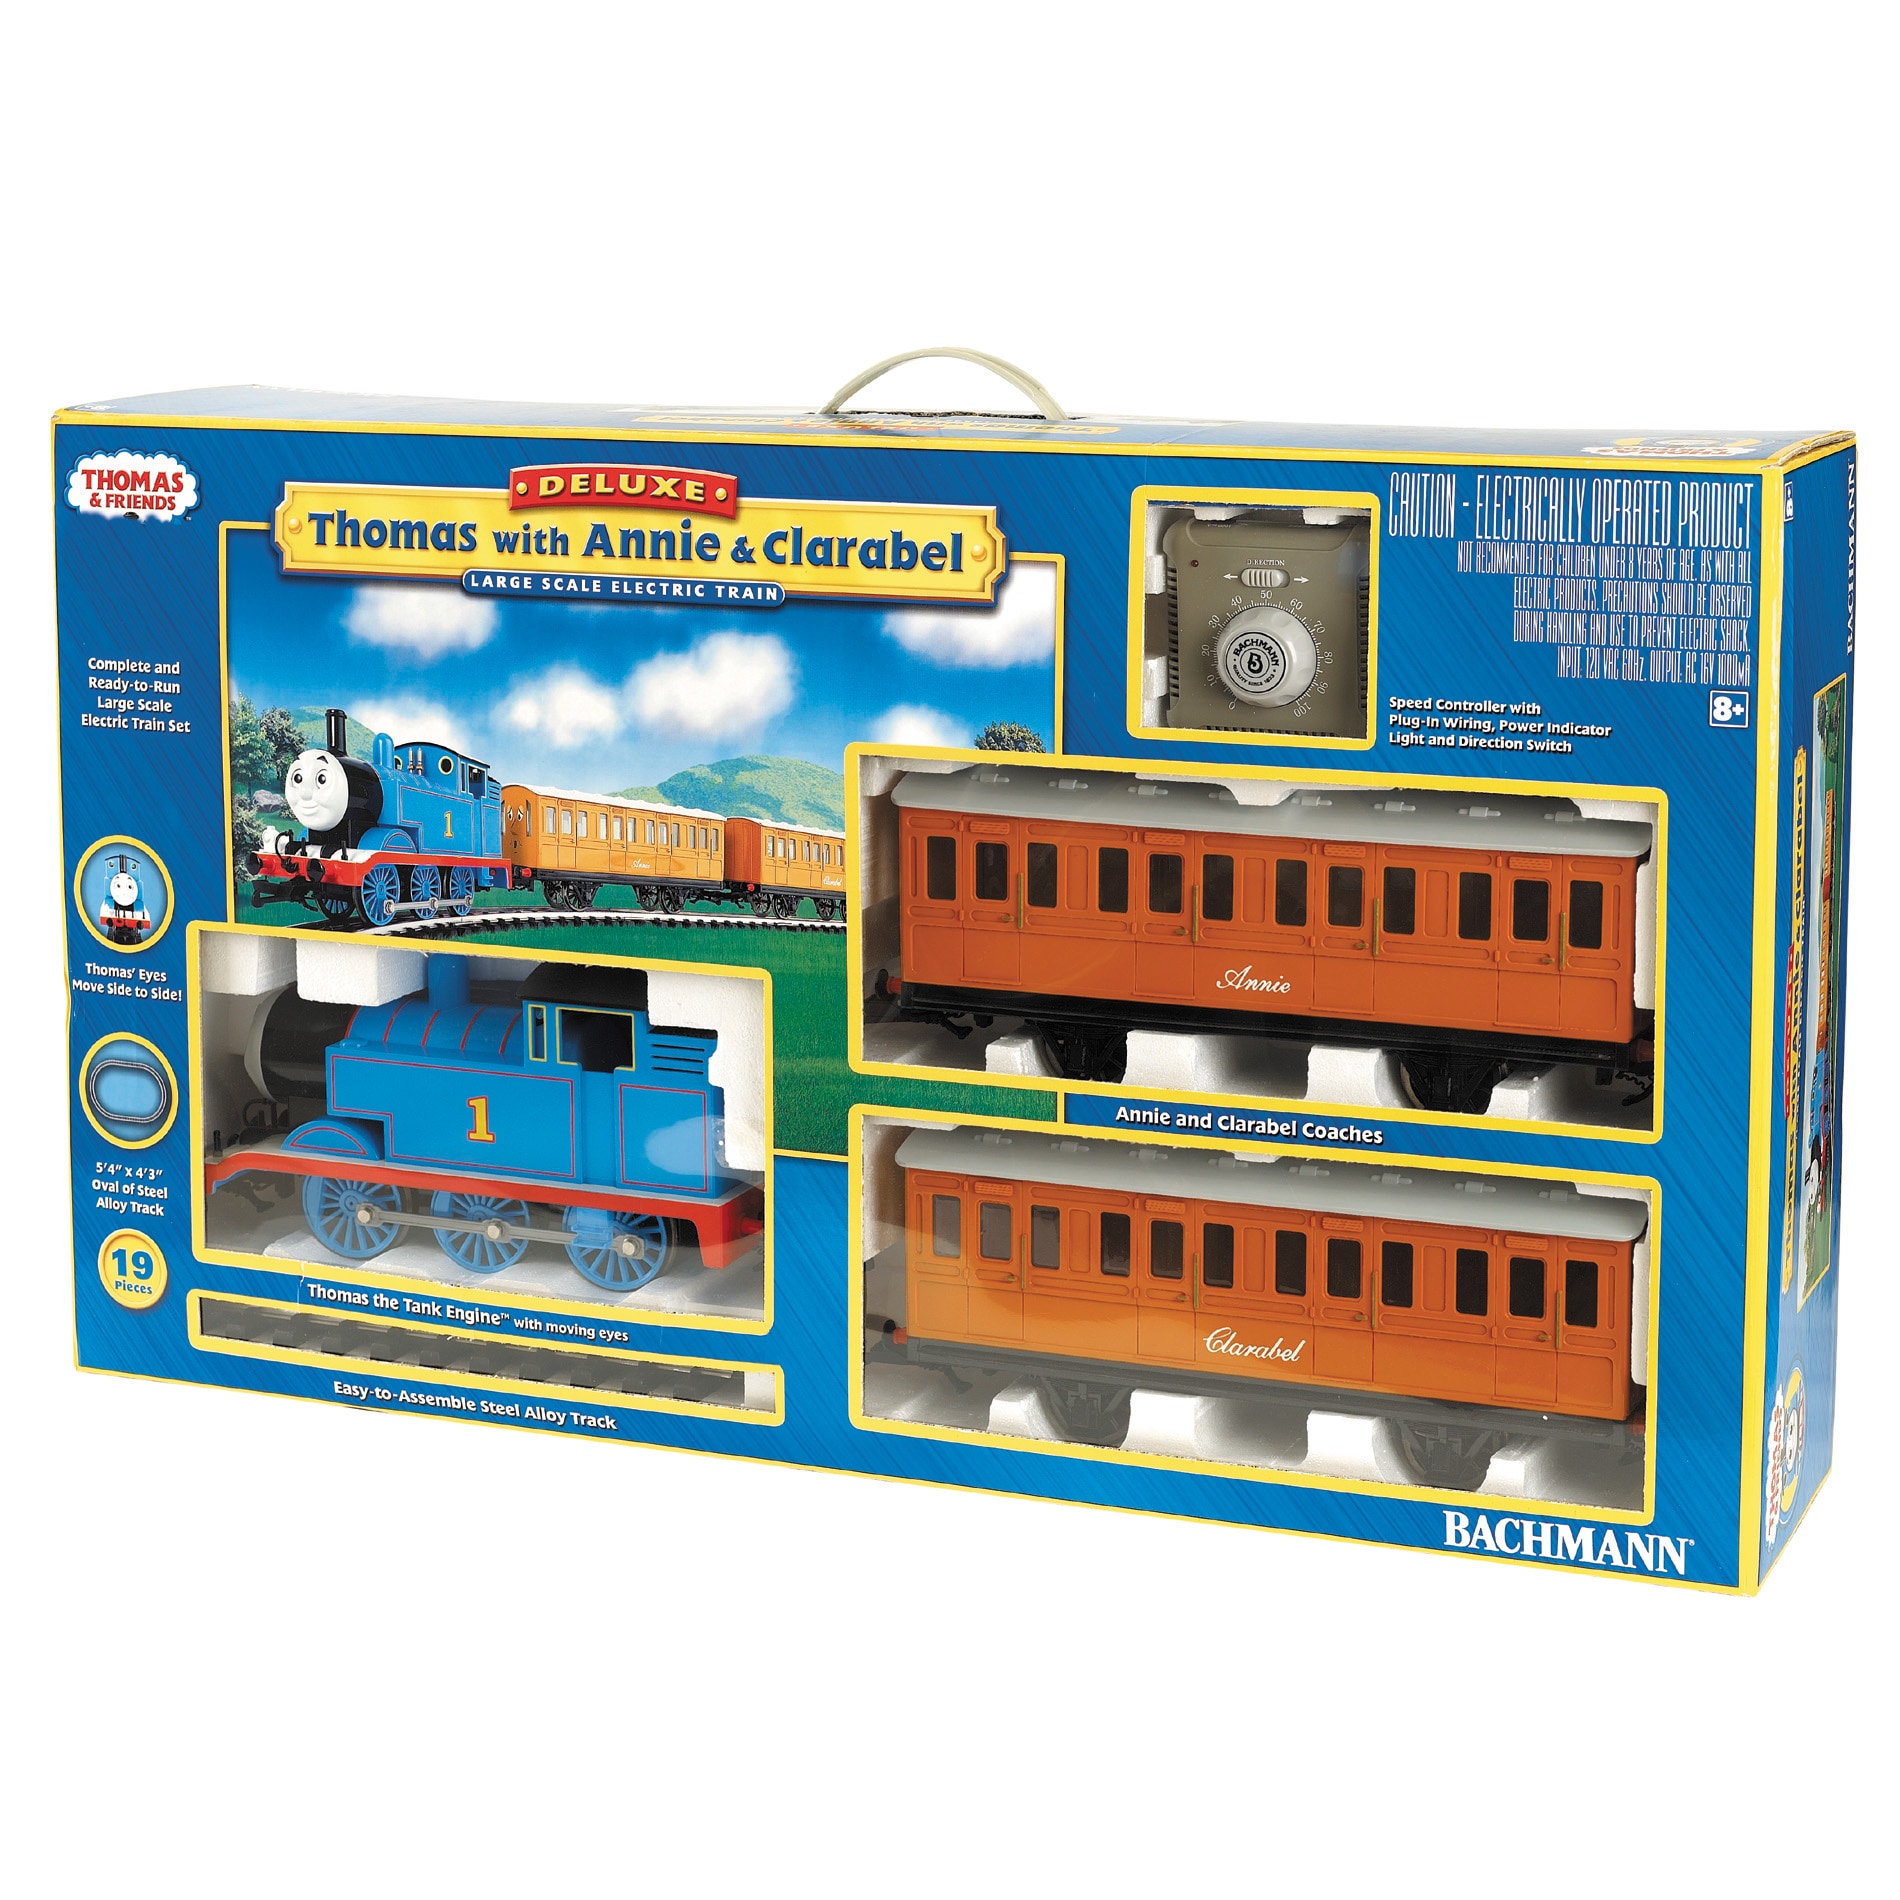  13922799 - Overstock.com Shopping - Big Discounts on Bachmann Trains